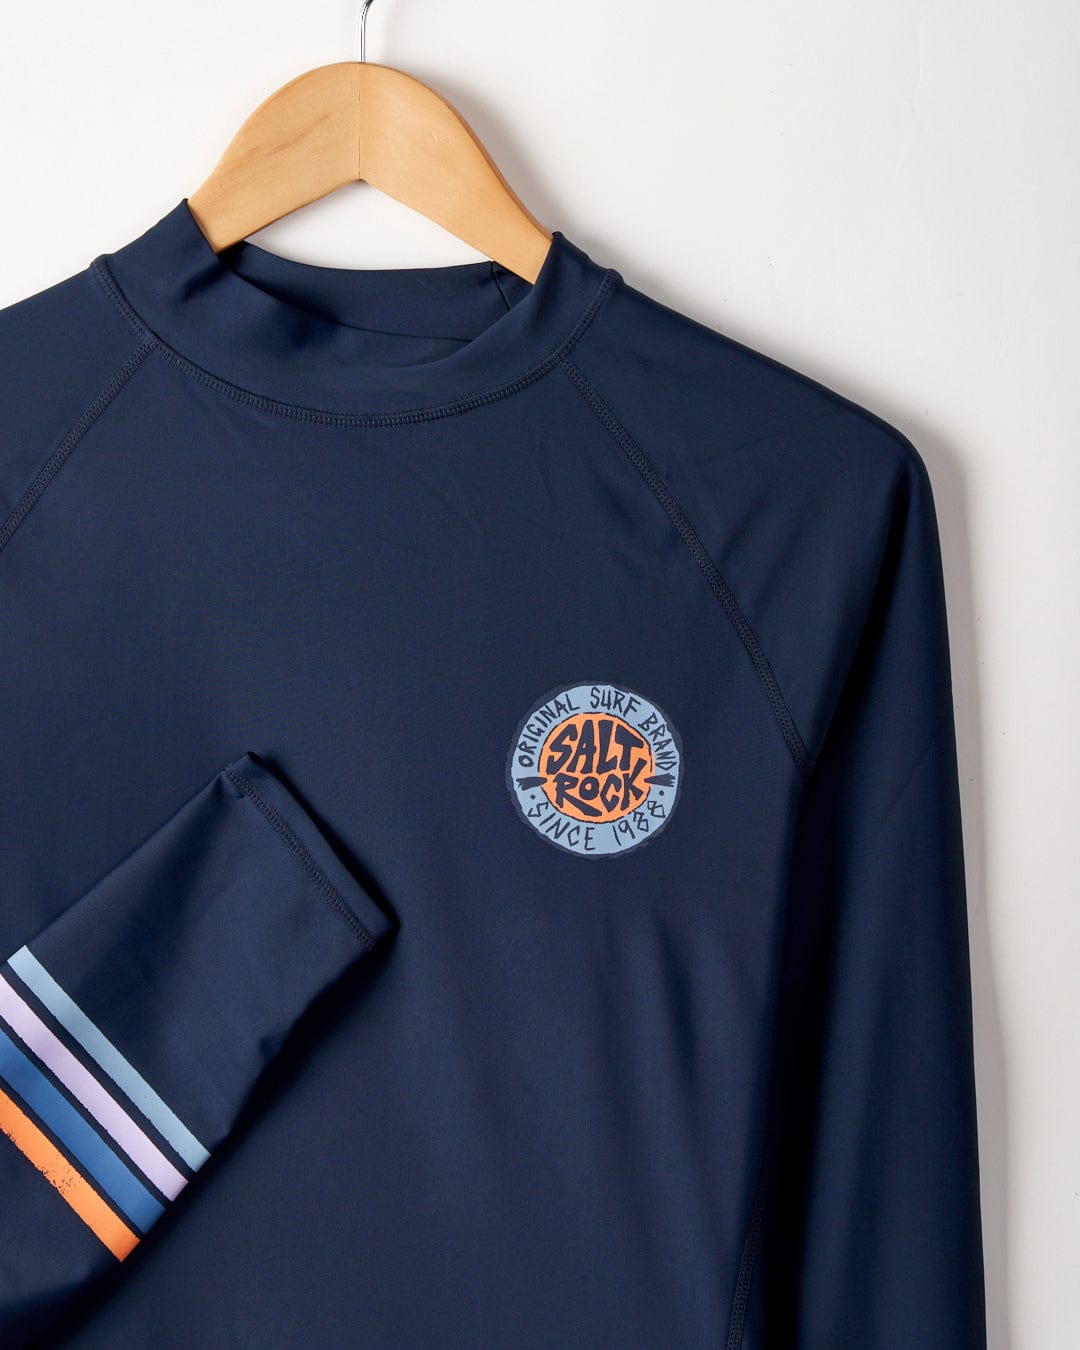 Saltrock's SR Original - Recycled Mens Long Sleeve Rashvest in Navy Blue with UPF 50 protection hanging on a wooden hanger against a white wall, featuring a logo on the chest and striped detail on the sleeve.